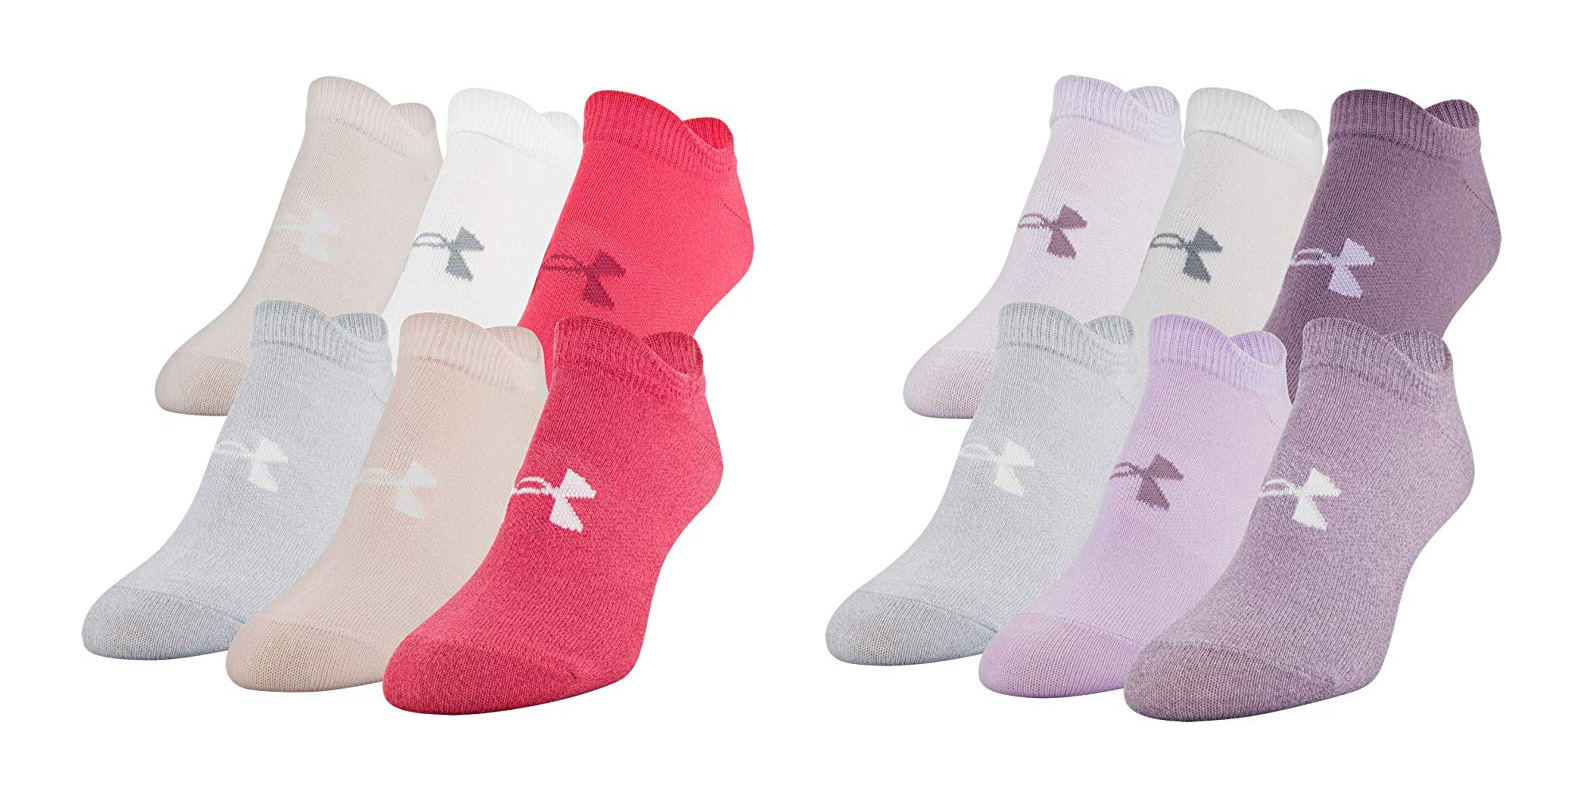 Score 6-pairs of Under Armour socks for just $10 Prime shipped(Reg. $20)